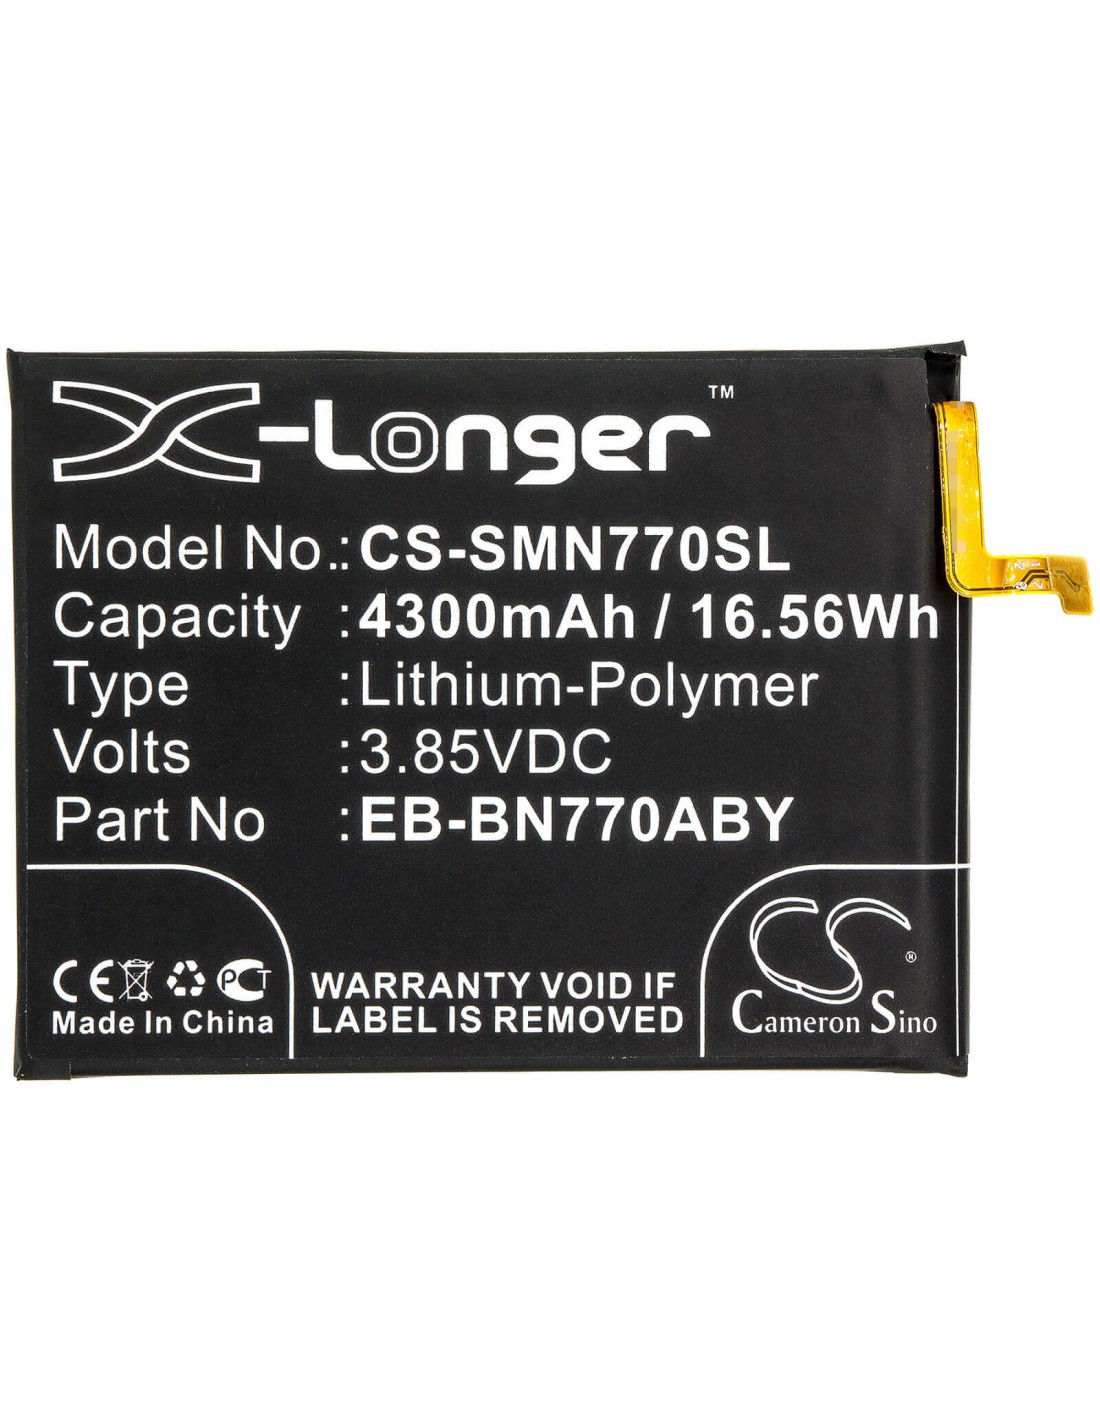 Battery for Samsung, Galaxy Note 10 Lite, Sm-n770f/ds 3.85V, 4300mAh - 16.56Wh